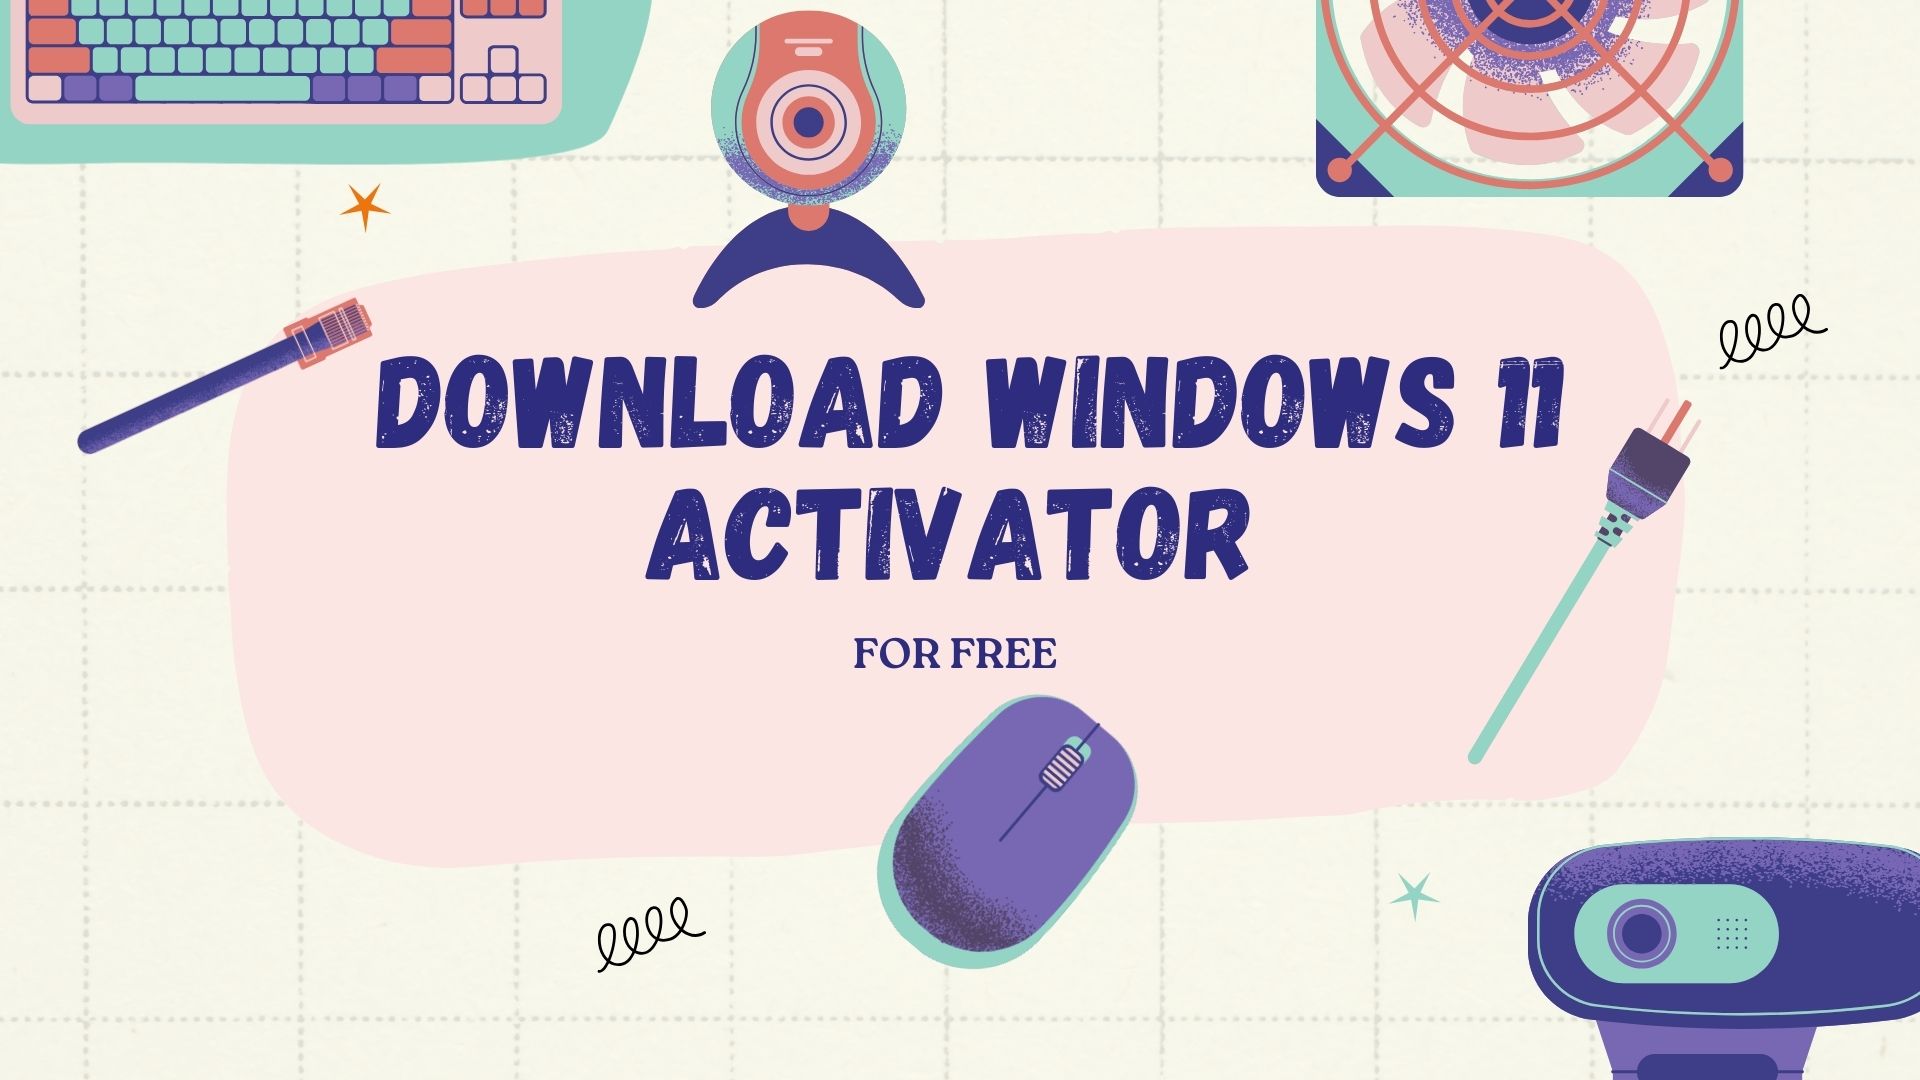 Download Windows 11 Activator for Free